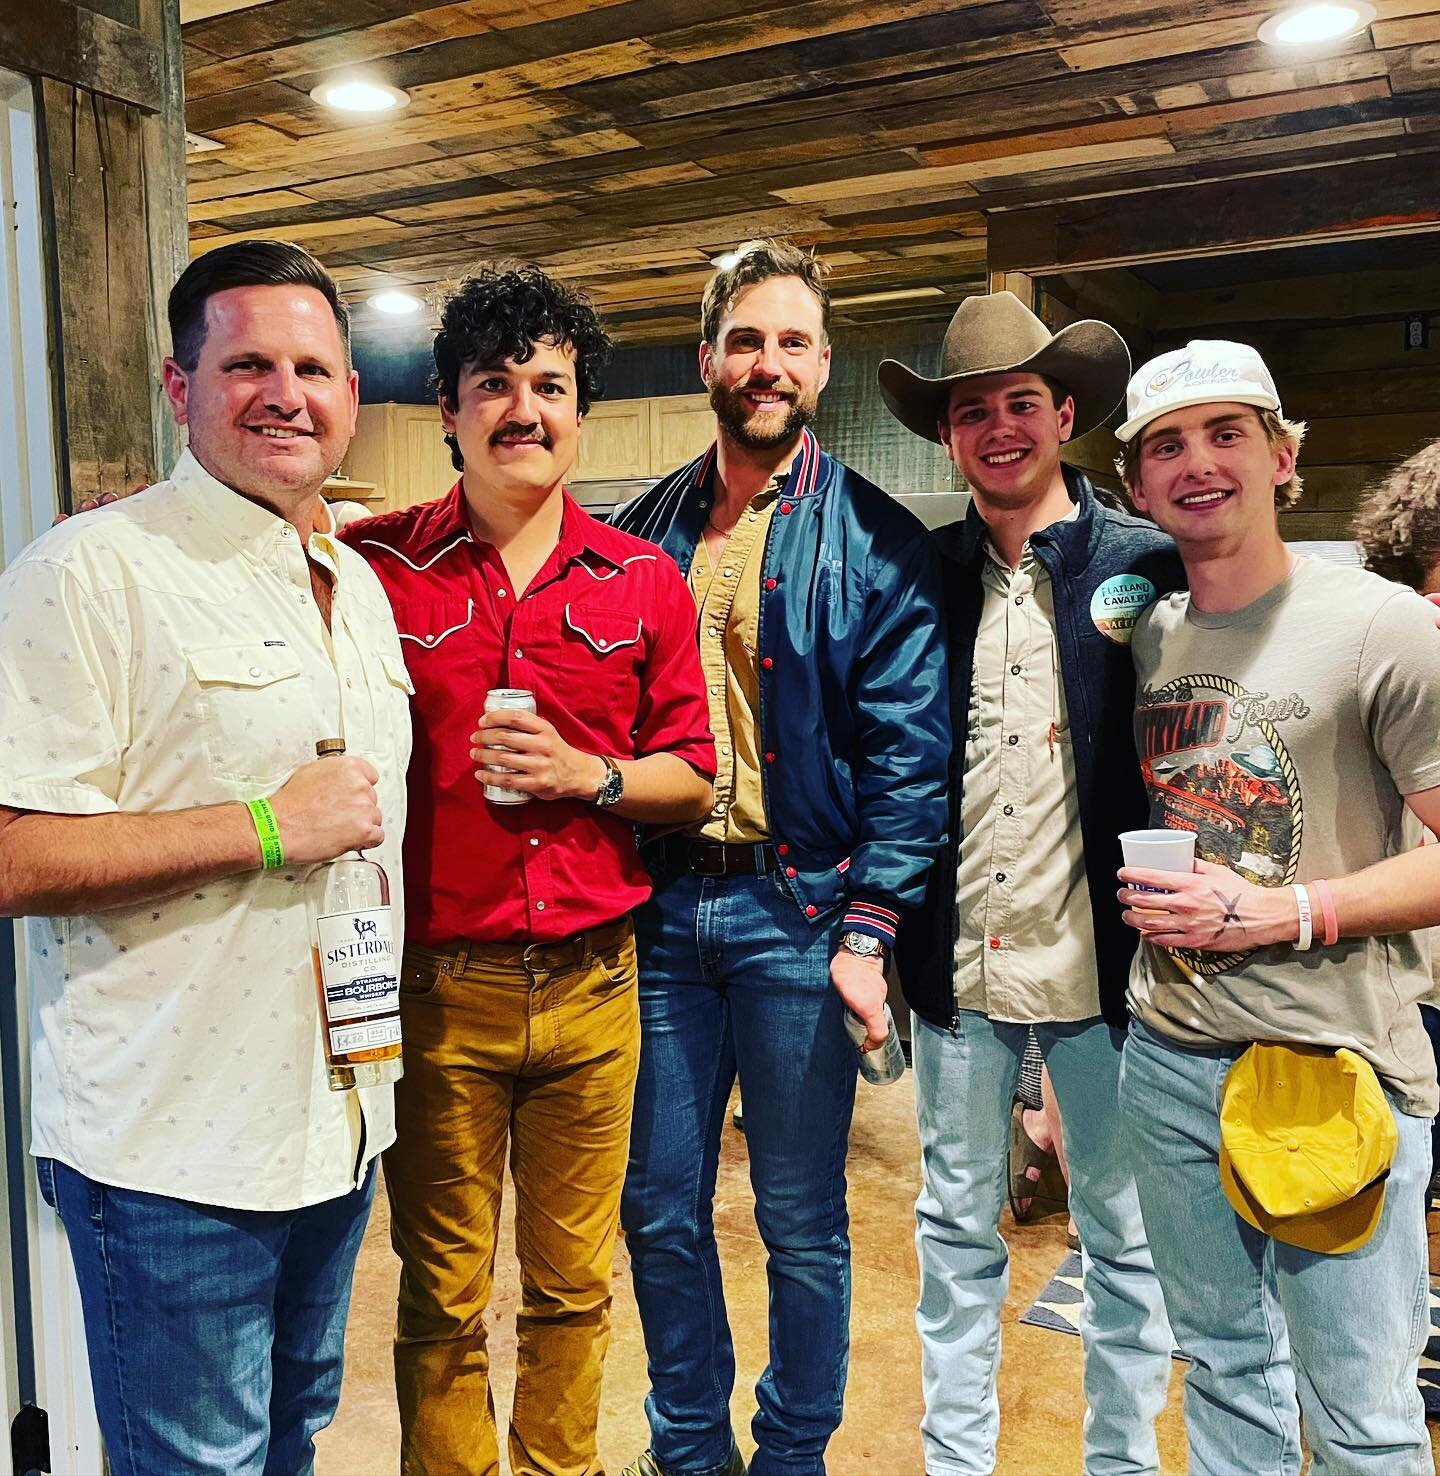 Thank you @flatlandcavalry for having us&hellip; you boys put on one hell of a show #drinksisterdale